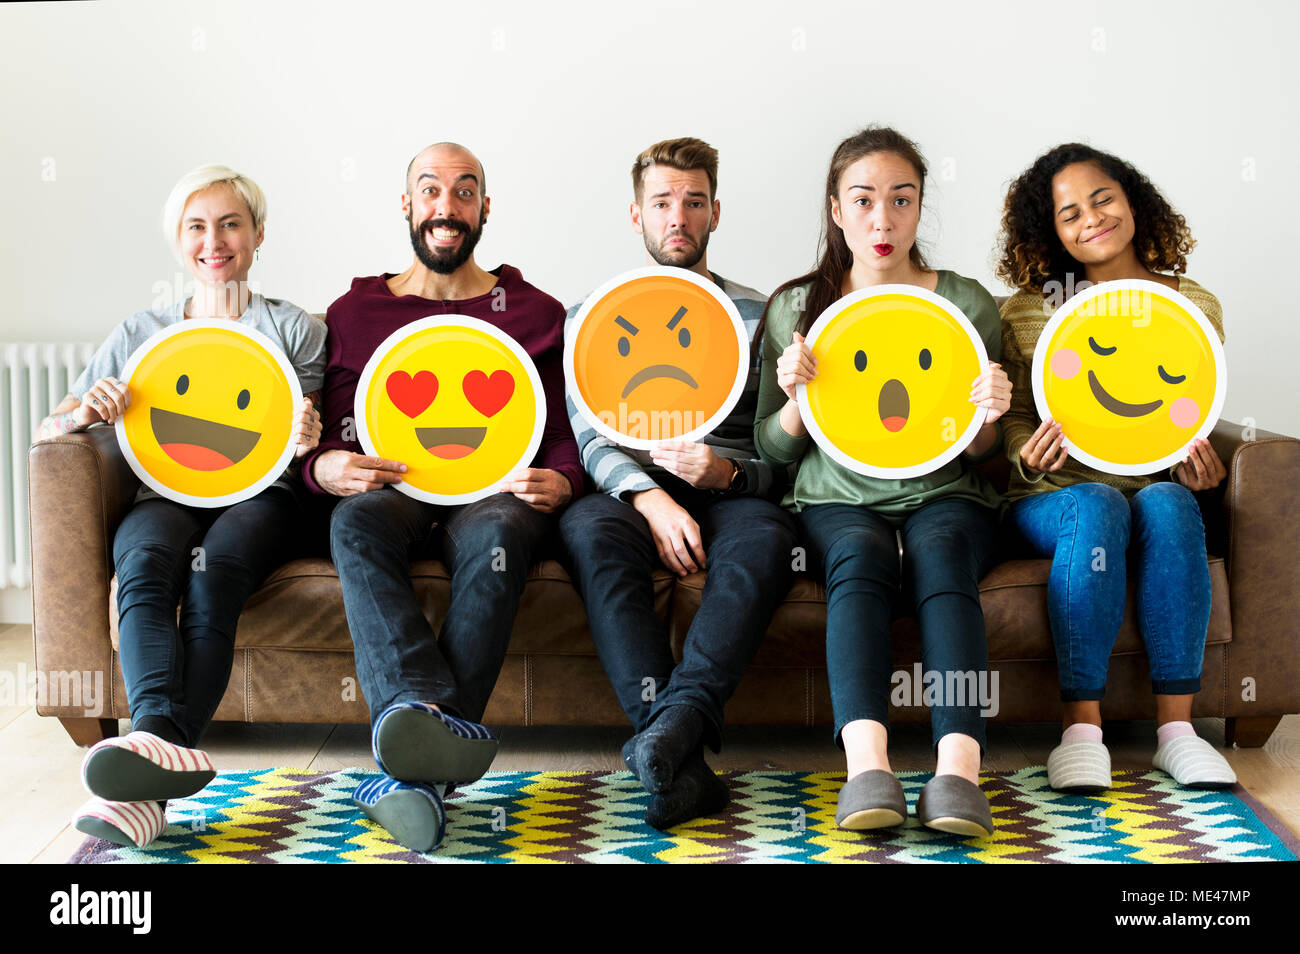 Group of diverse people holding emoticon icons Stock Photo - Alamy